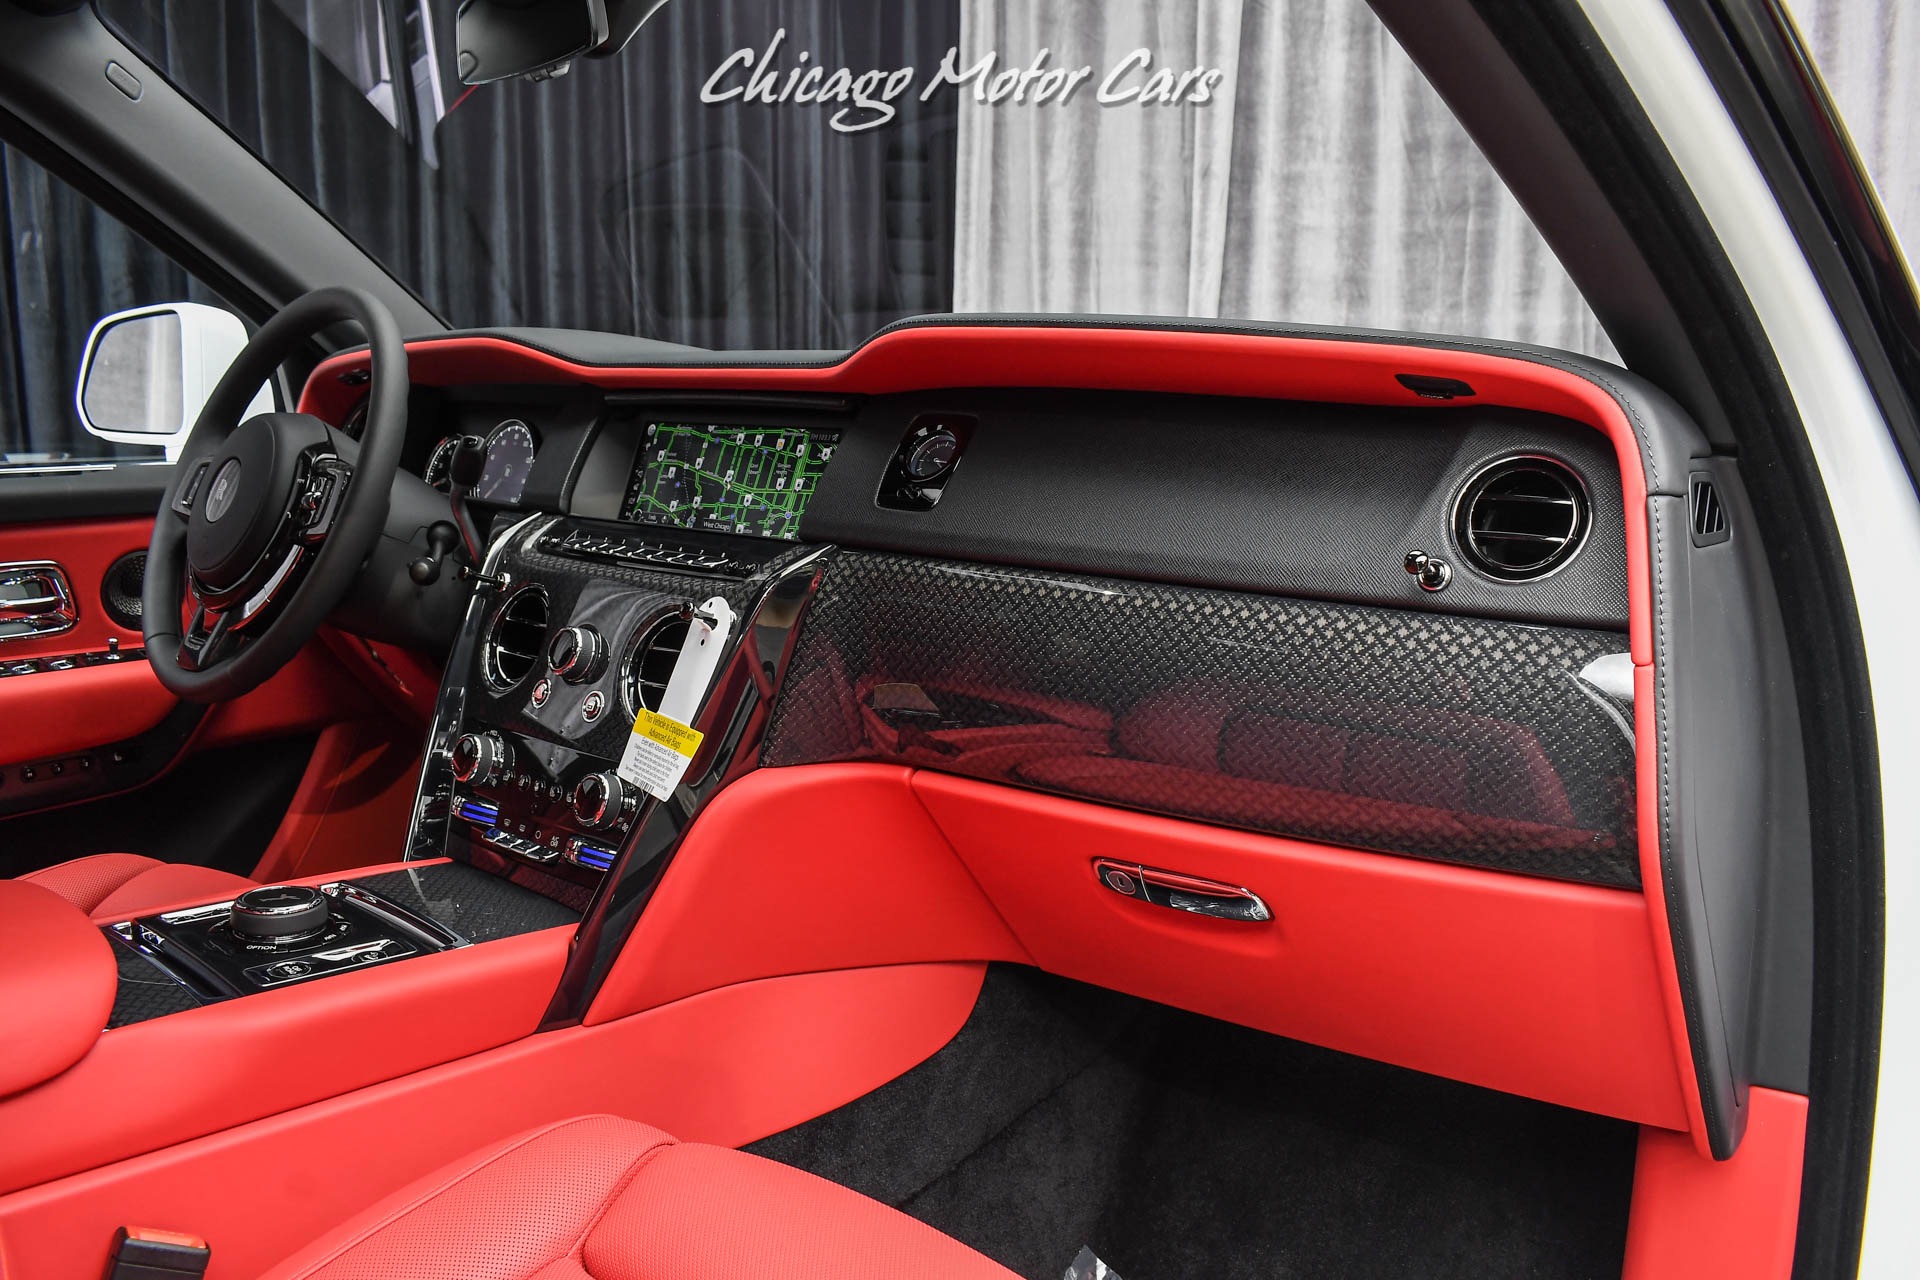 Used 2022 RollsRoyce Cullinan Black Badge Shooting Star Headliner HOT  Spec LOADED Red Interior For Sale Special Pricing  Chicago Motor Cars  Stock 19310